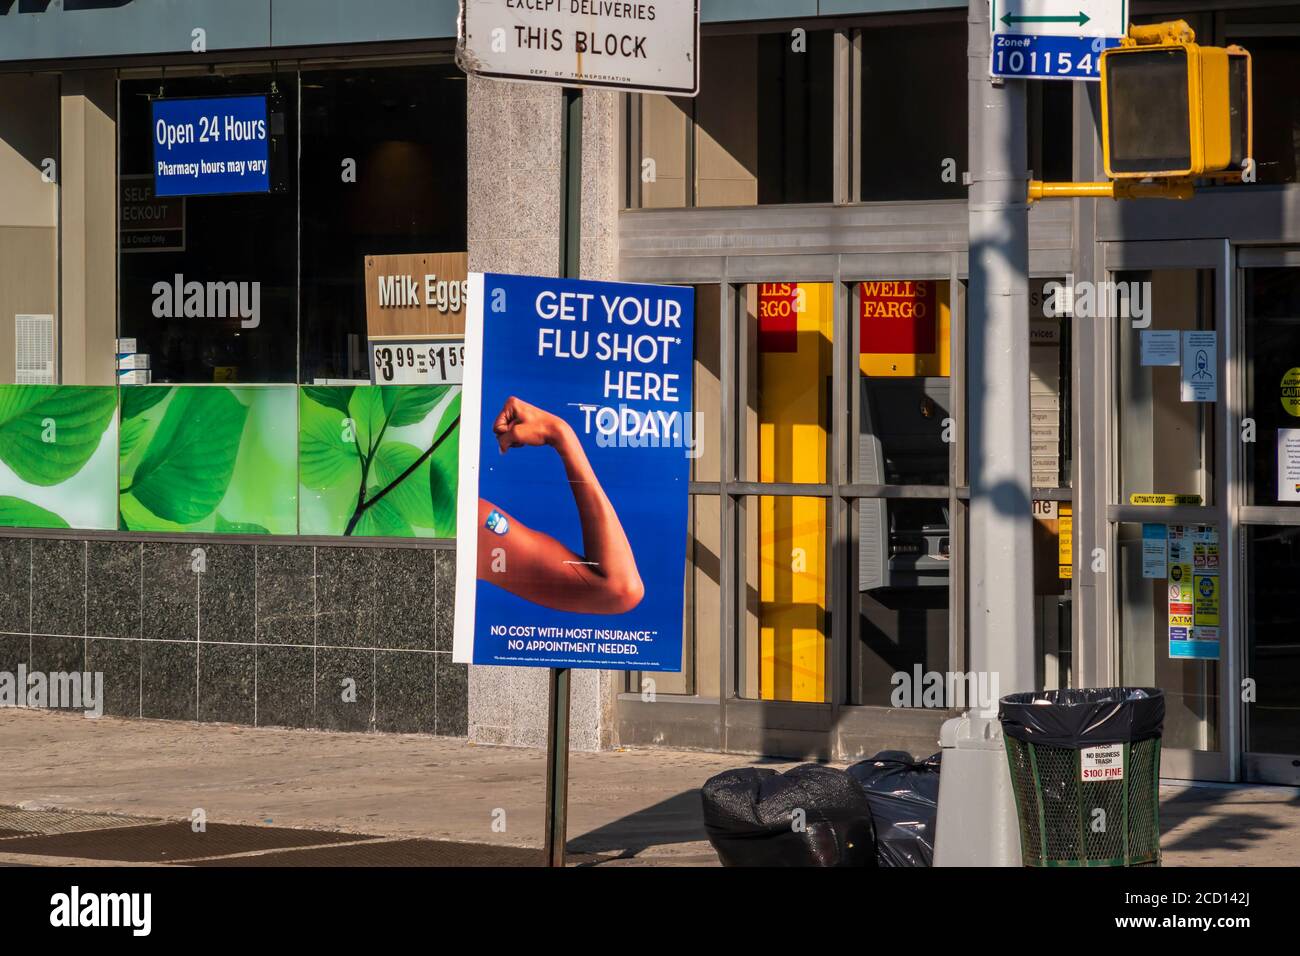 A sign in front of a Rite Aid drugstore in New York on Sunday, August 23, 2020 advertises the availability of the flu vaccine. (© Richard B. Levine) Stock Photo